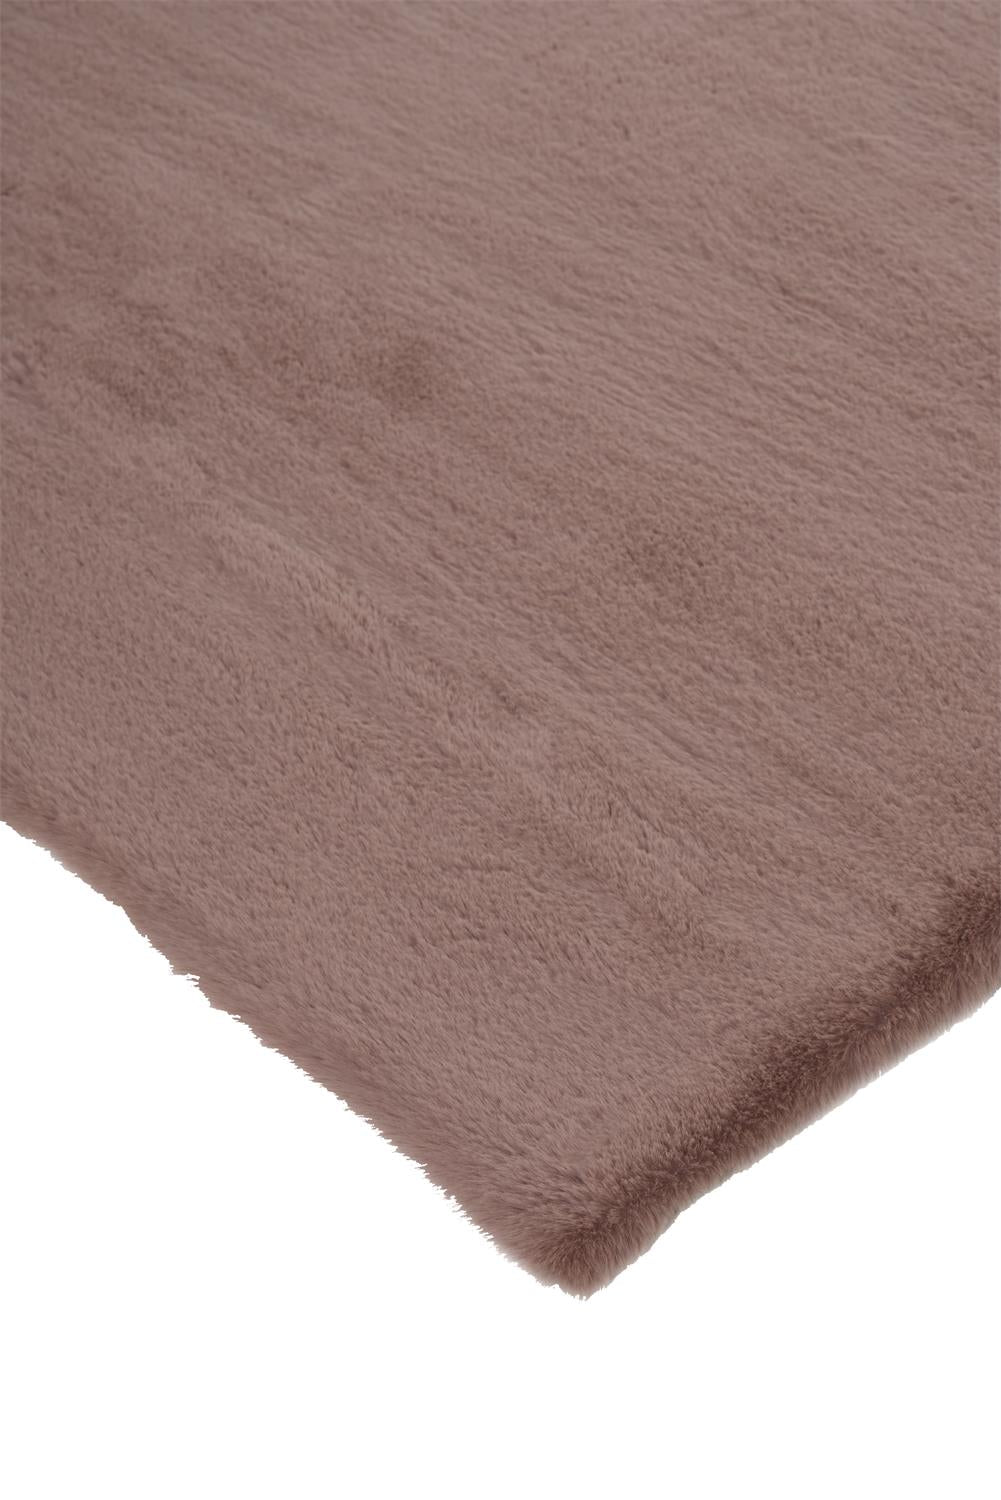 Luxe Velour 4506F Machine Made Synthetic Blend Indoor Area Rug by Feizy Rugs